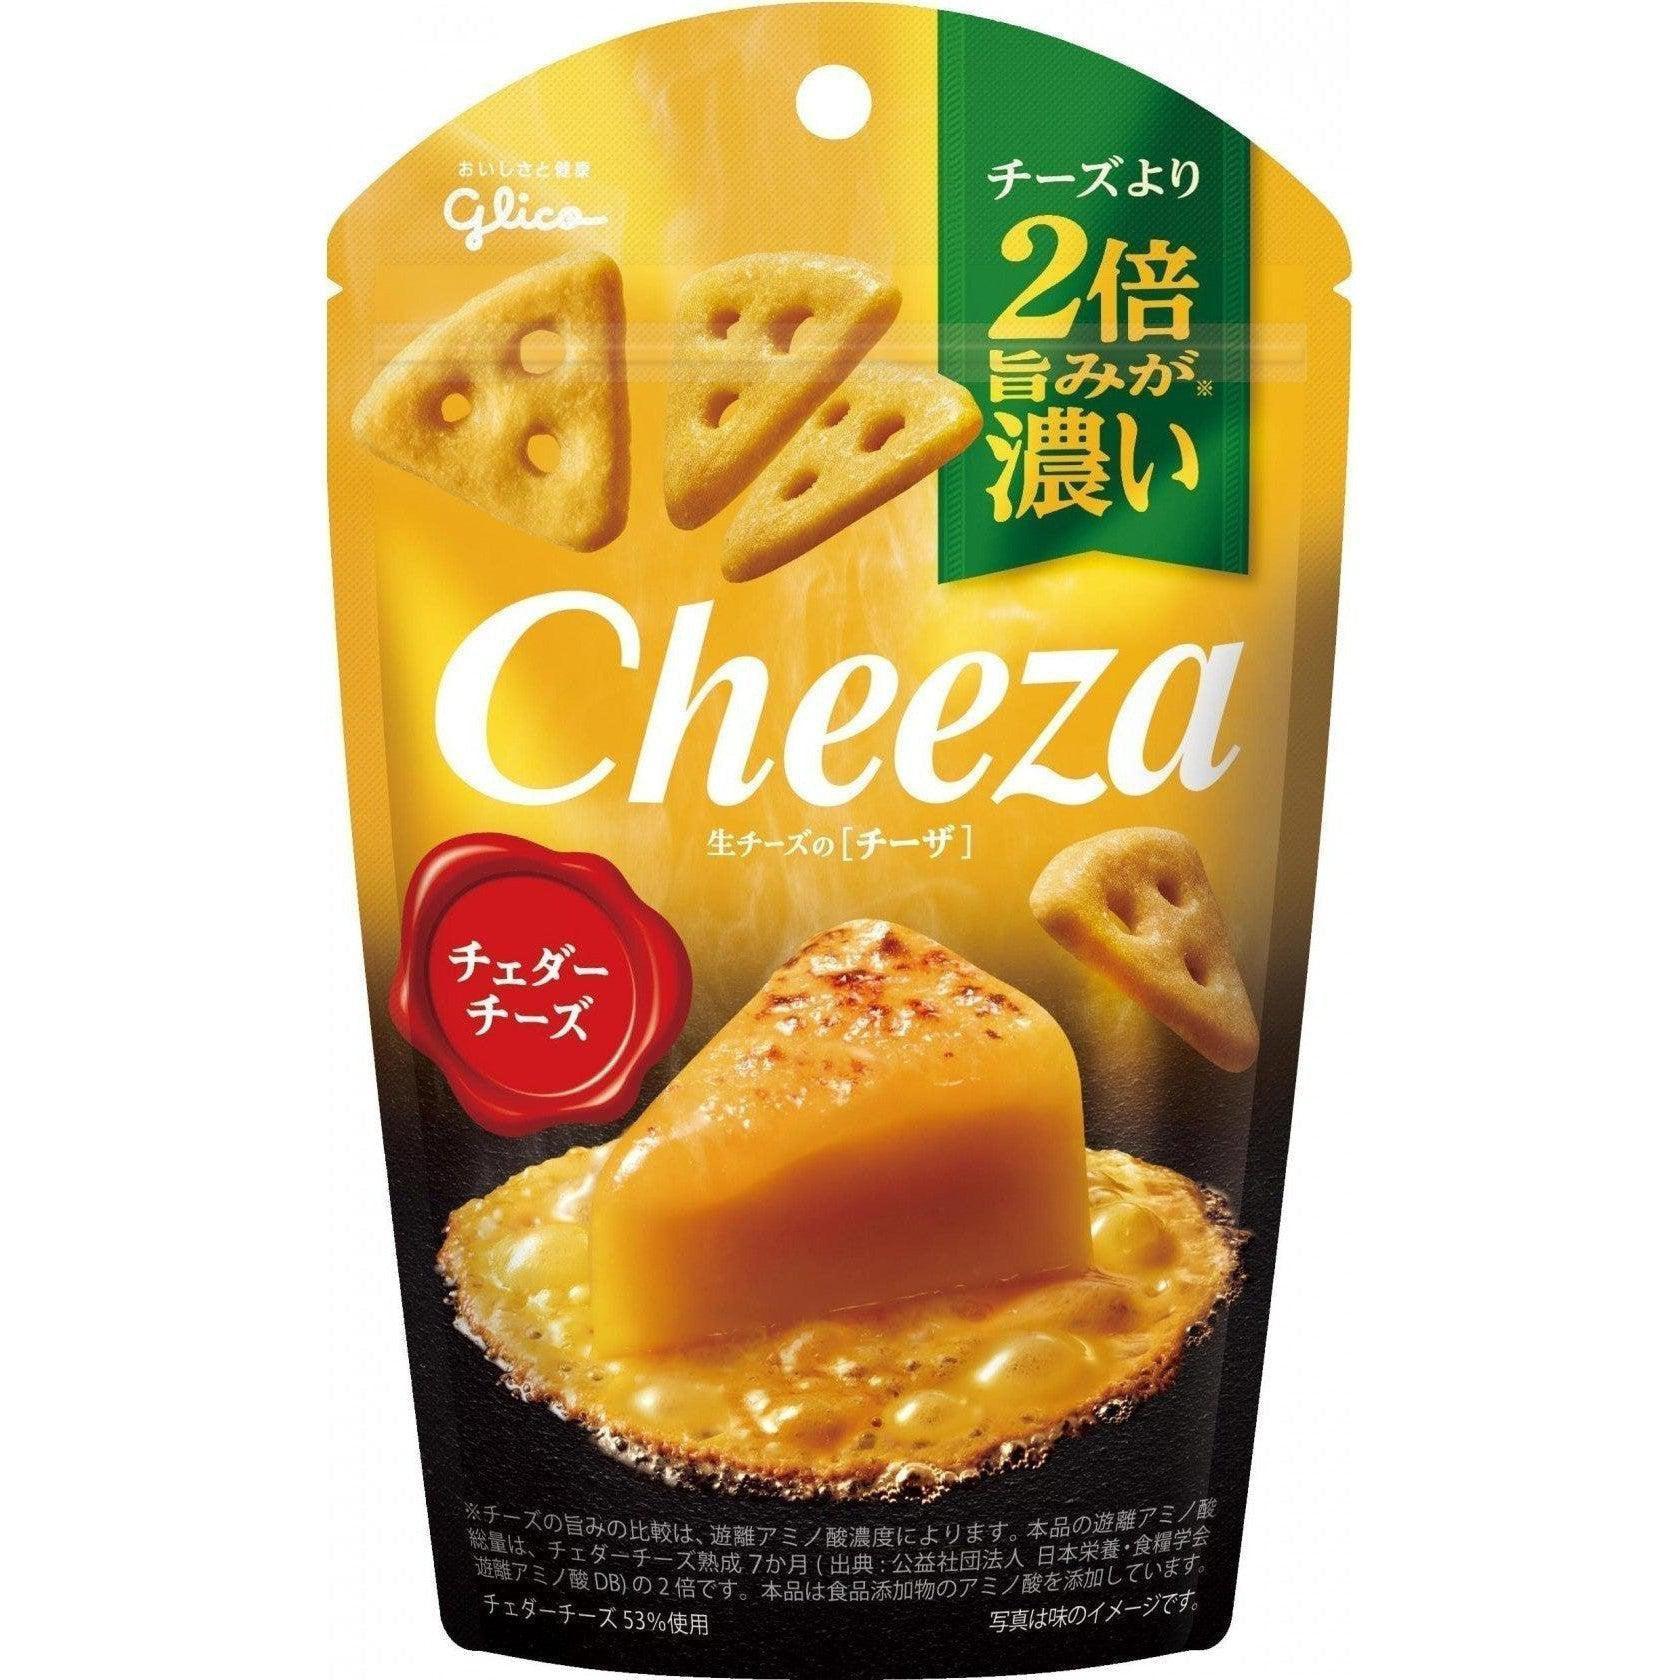 Glico Cheeza Cheddar Cheese Crackers (Pack of 10)